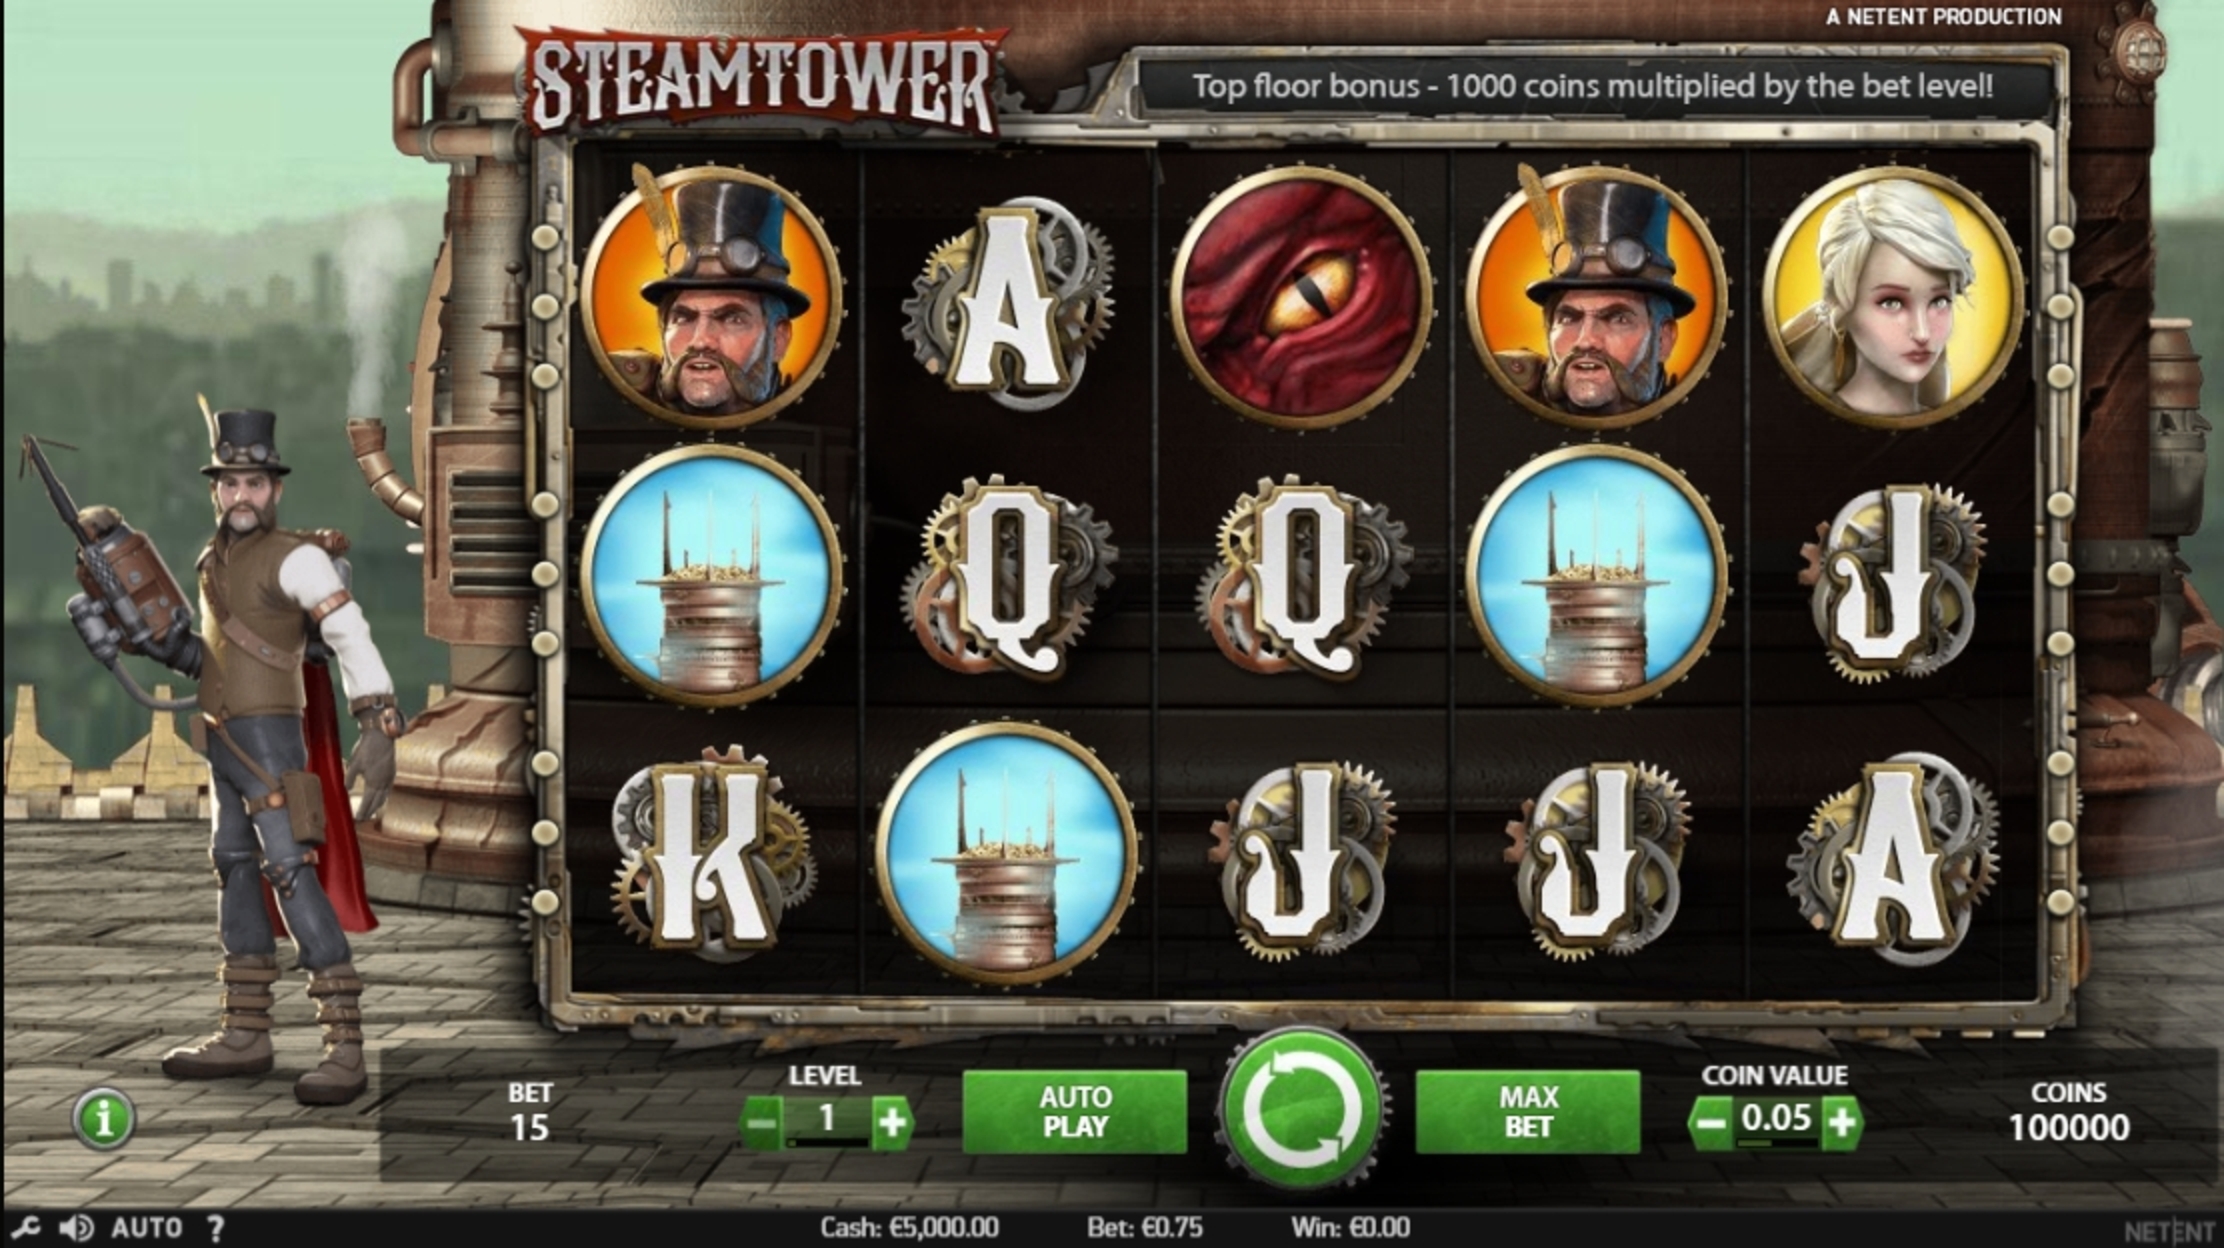 Reels in Steam Tower Slot Game by NetEnt